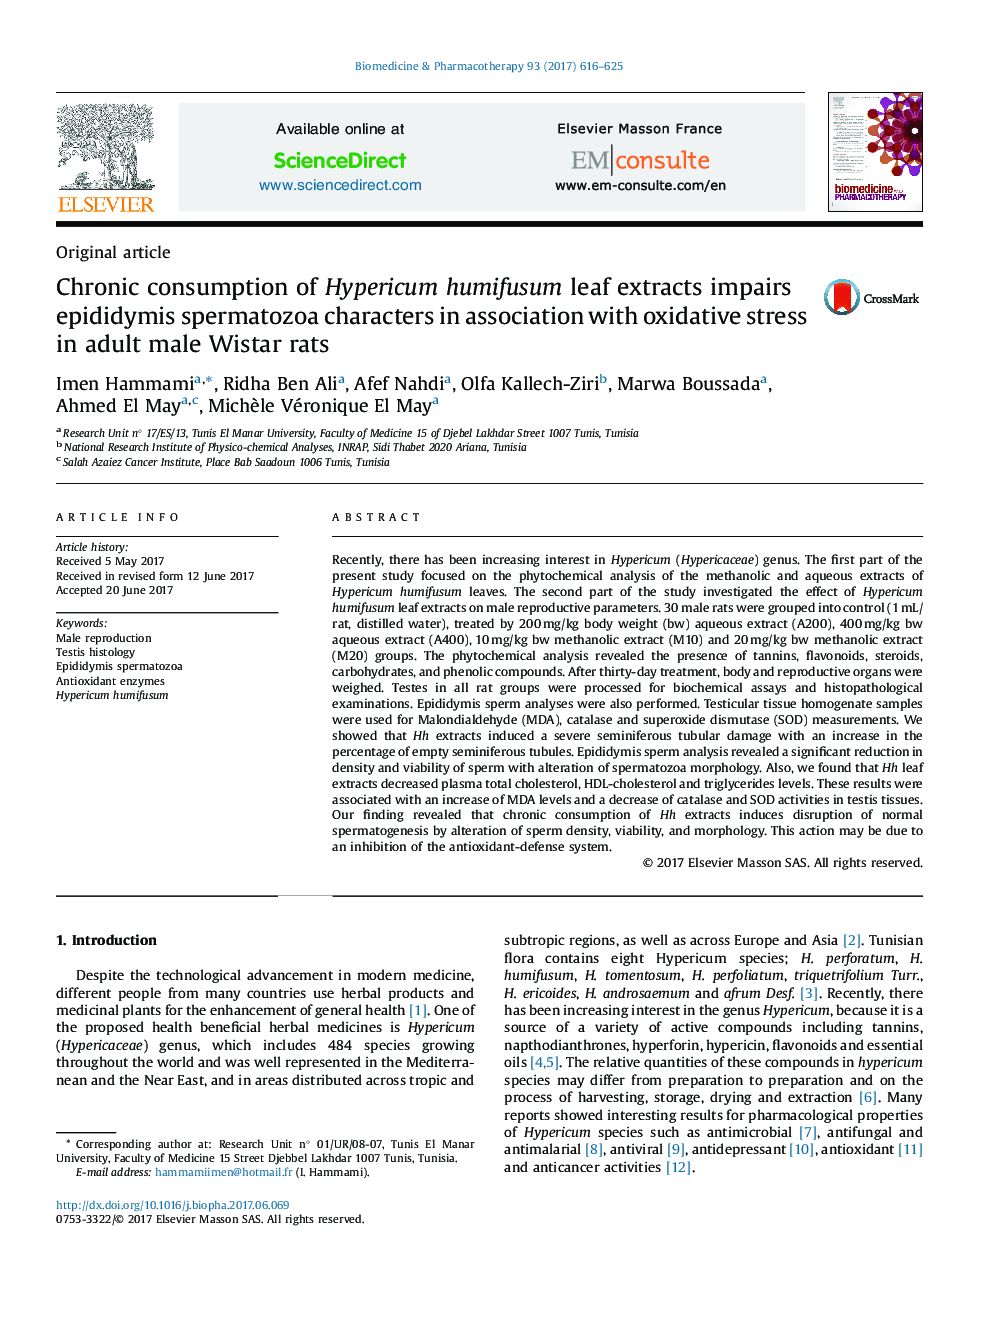 Chronic consumption of Hypericum humifusum leaf extracts impairs epididymis spermatozoa characters in association with oxidative stress in adult male Wistar rats